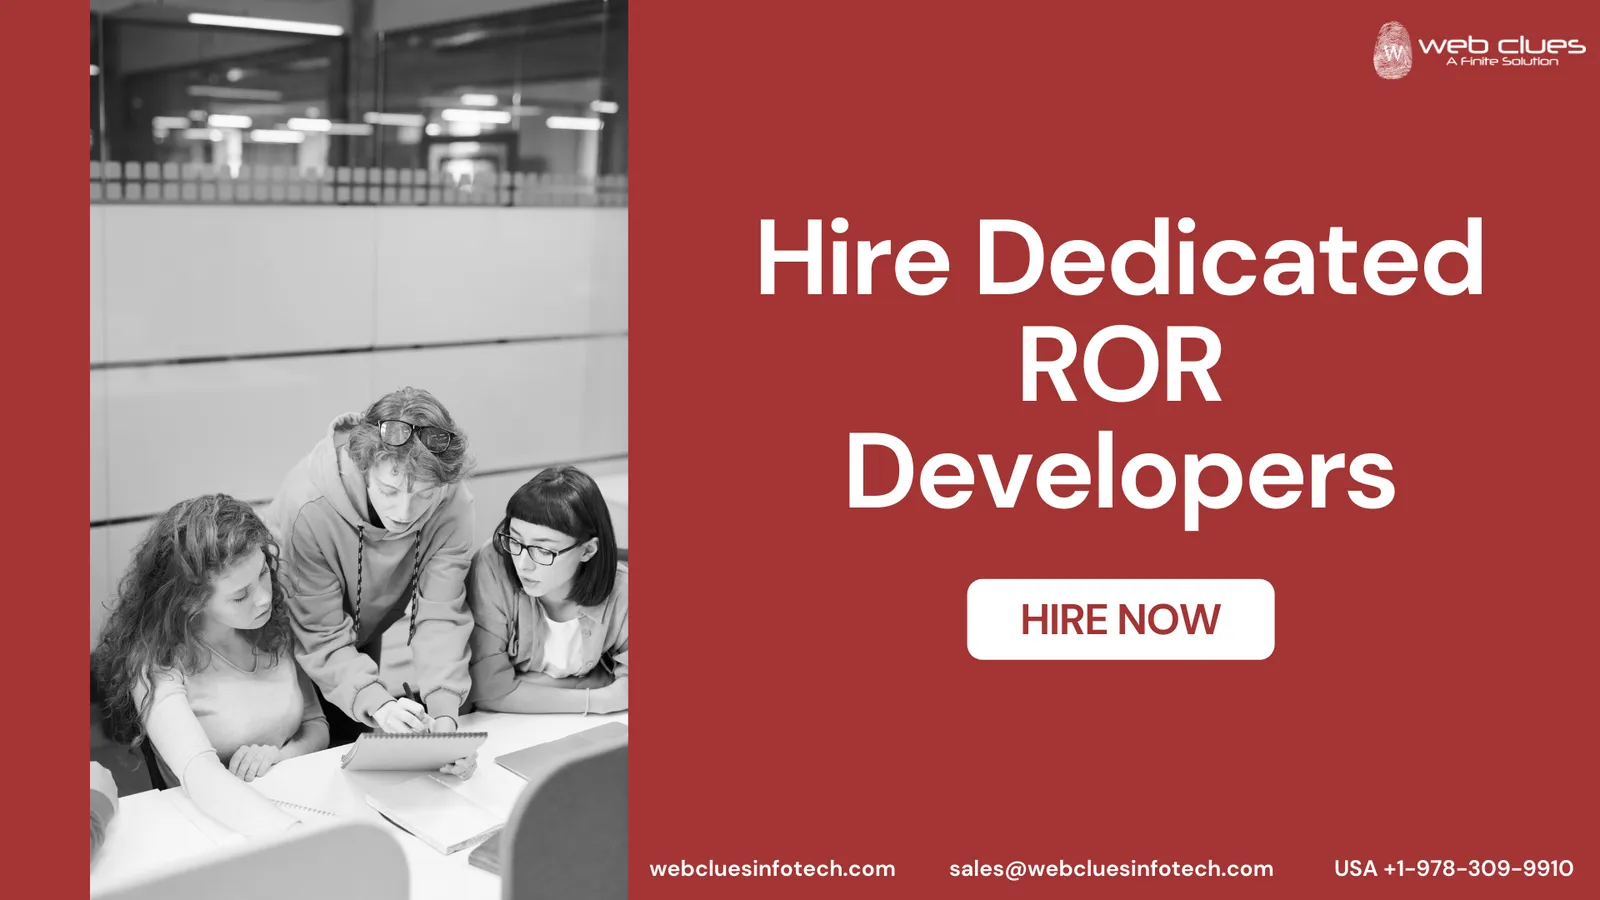 Hire Dedicated ROR Developers